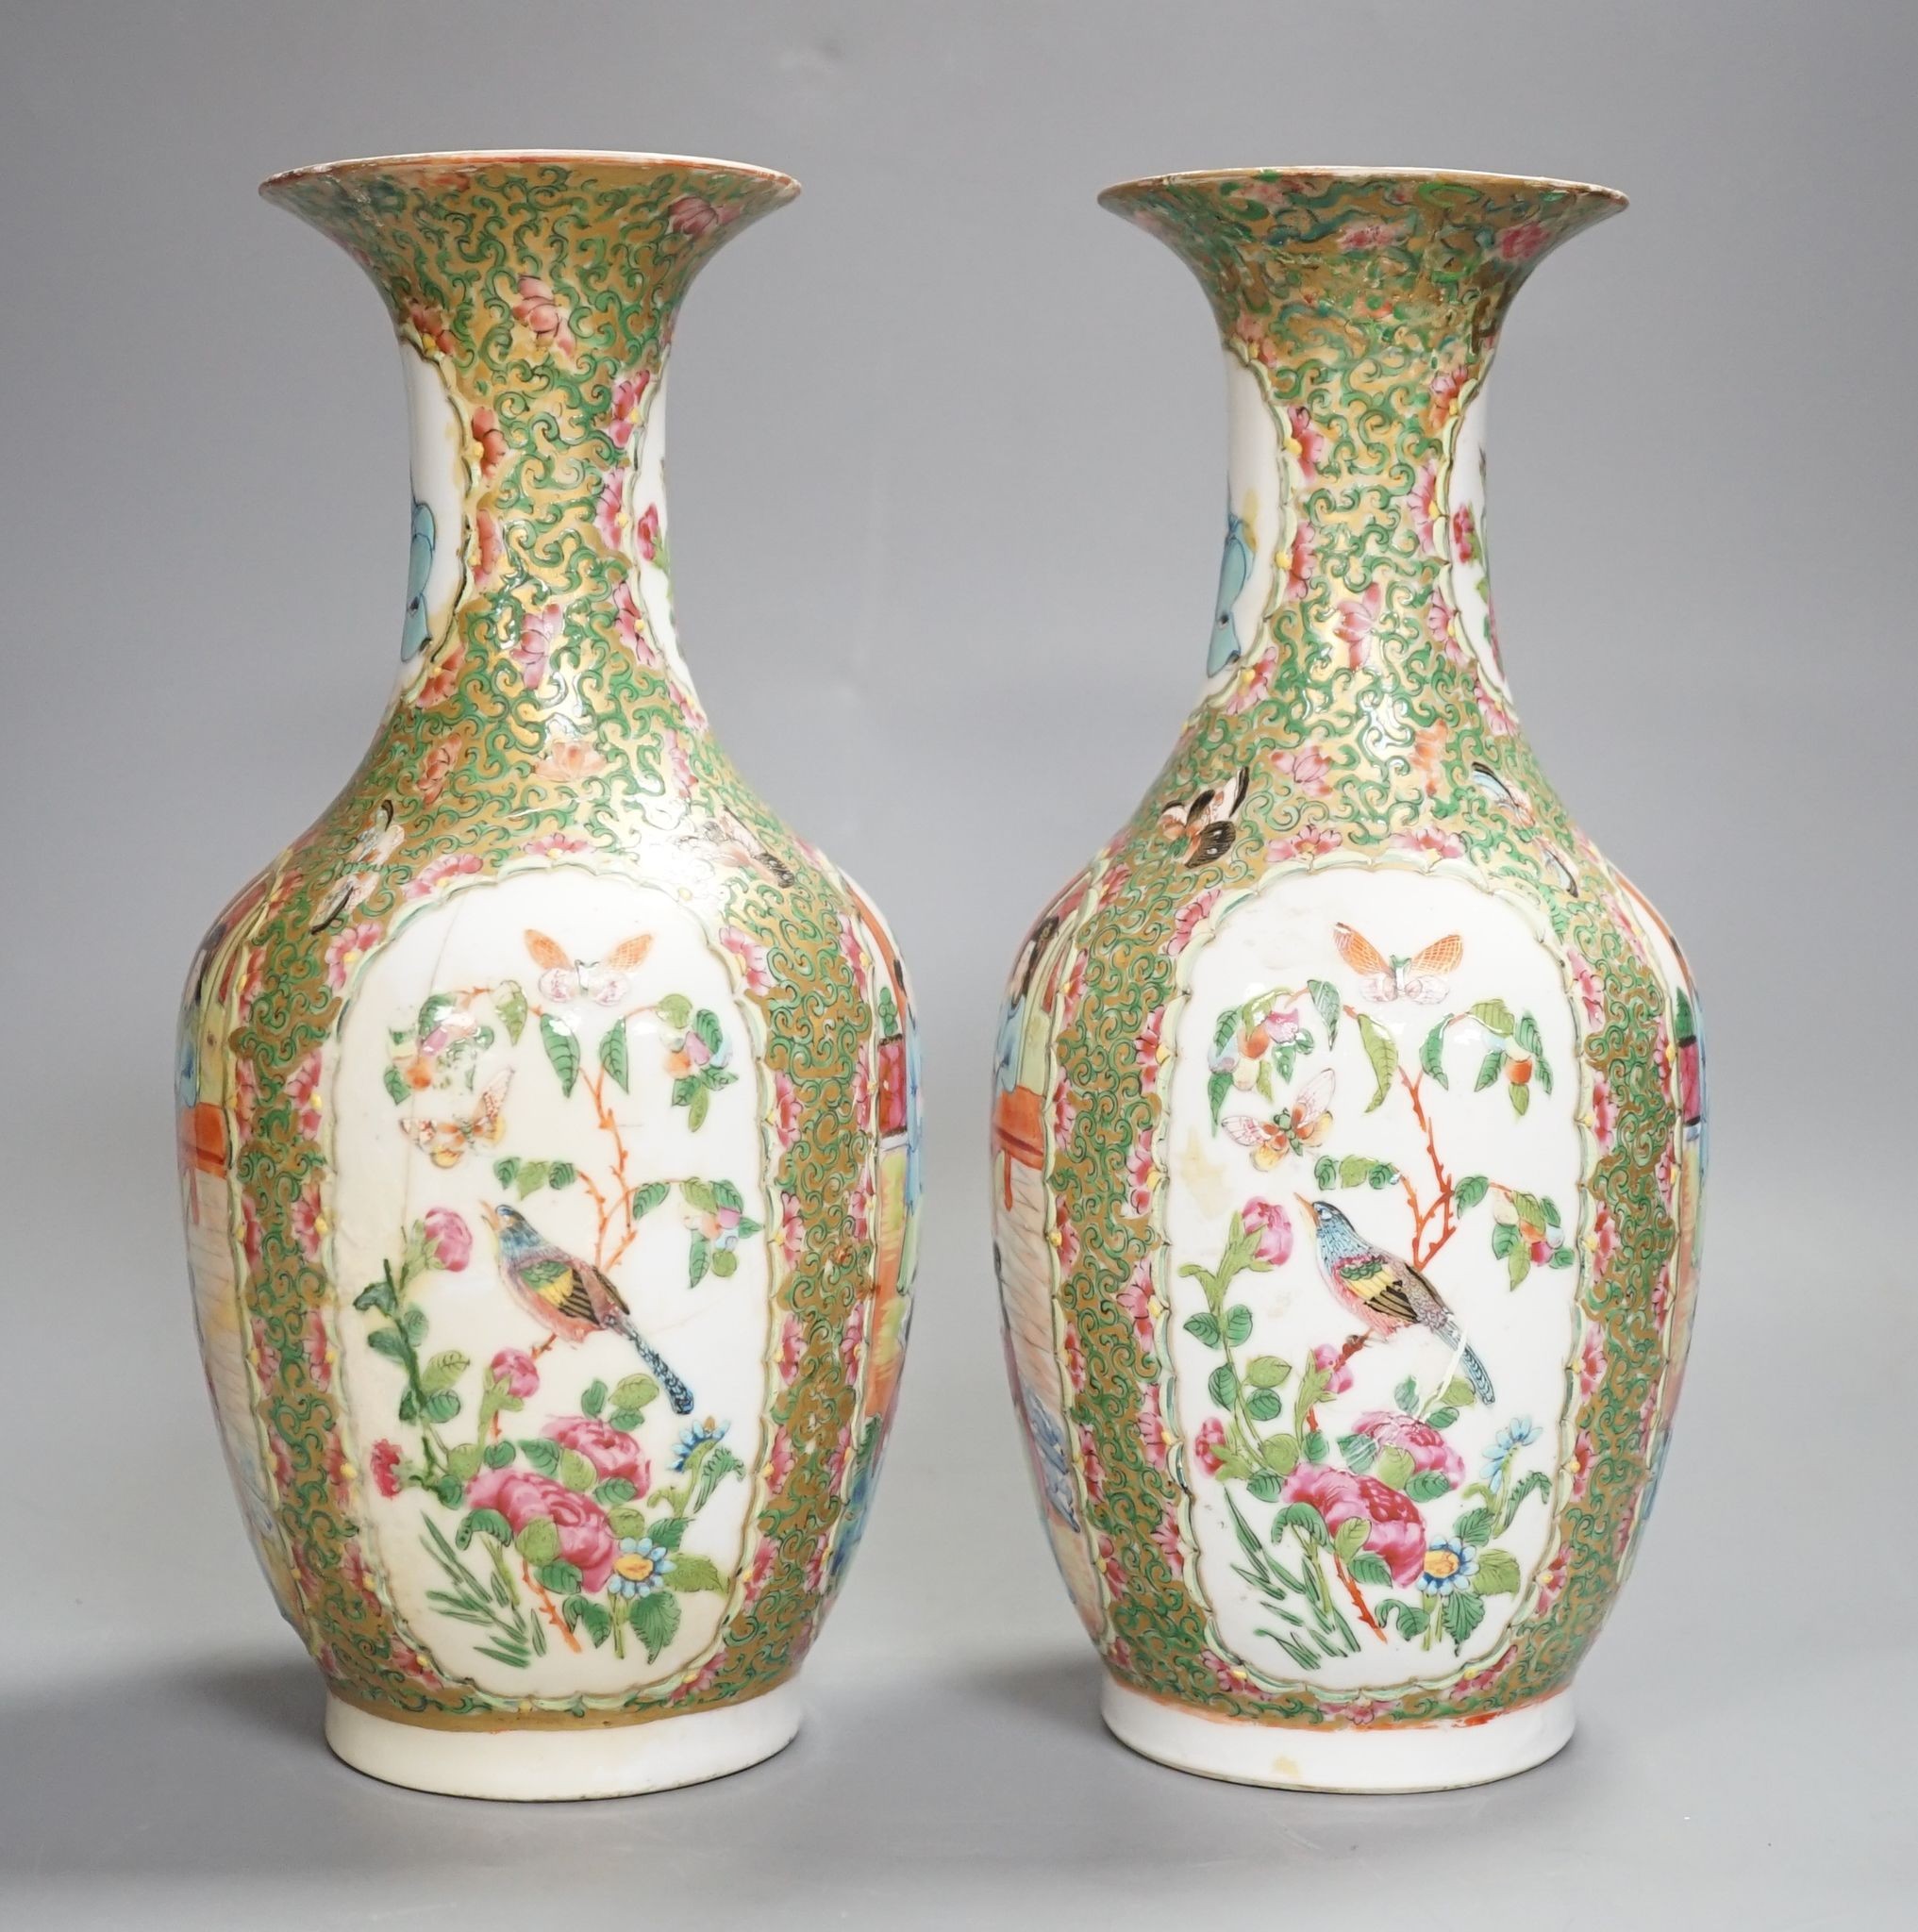 A pair of 19th century Chinese famille rose vases, 24 cms high.